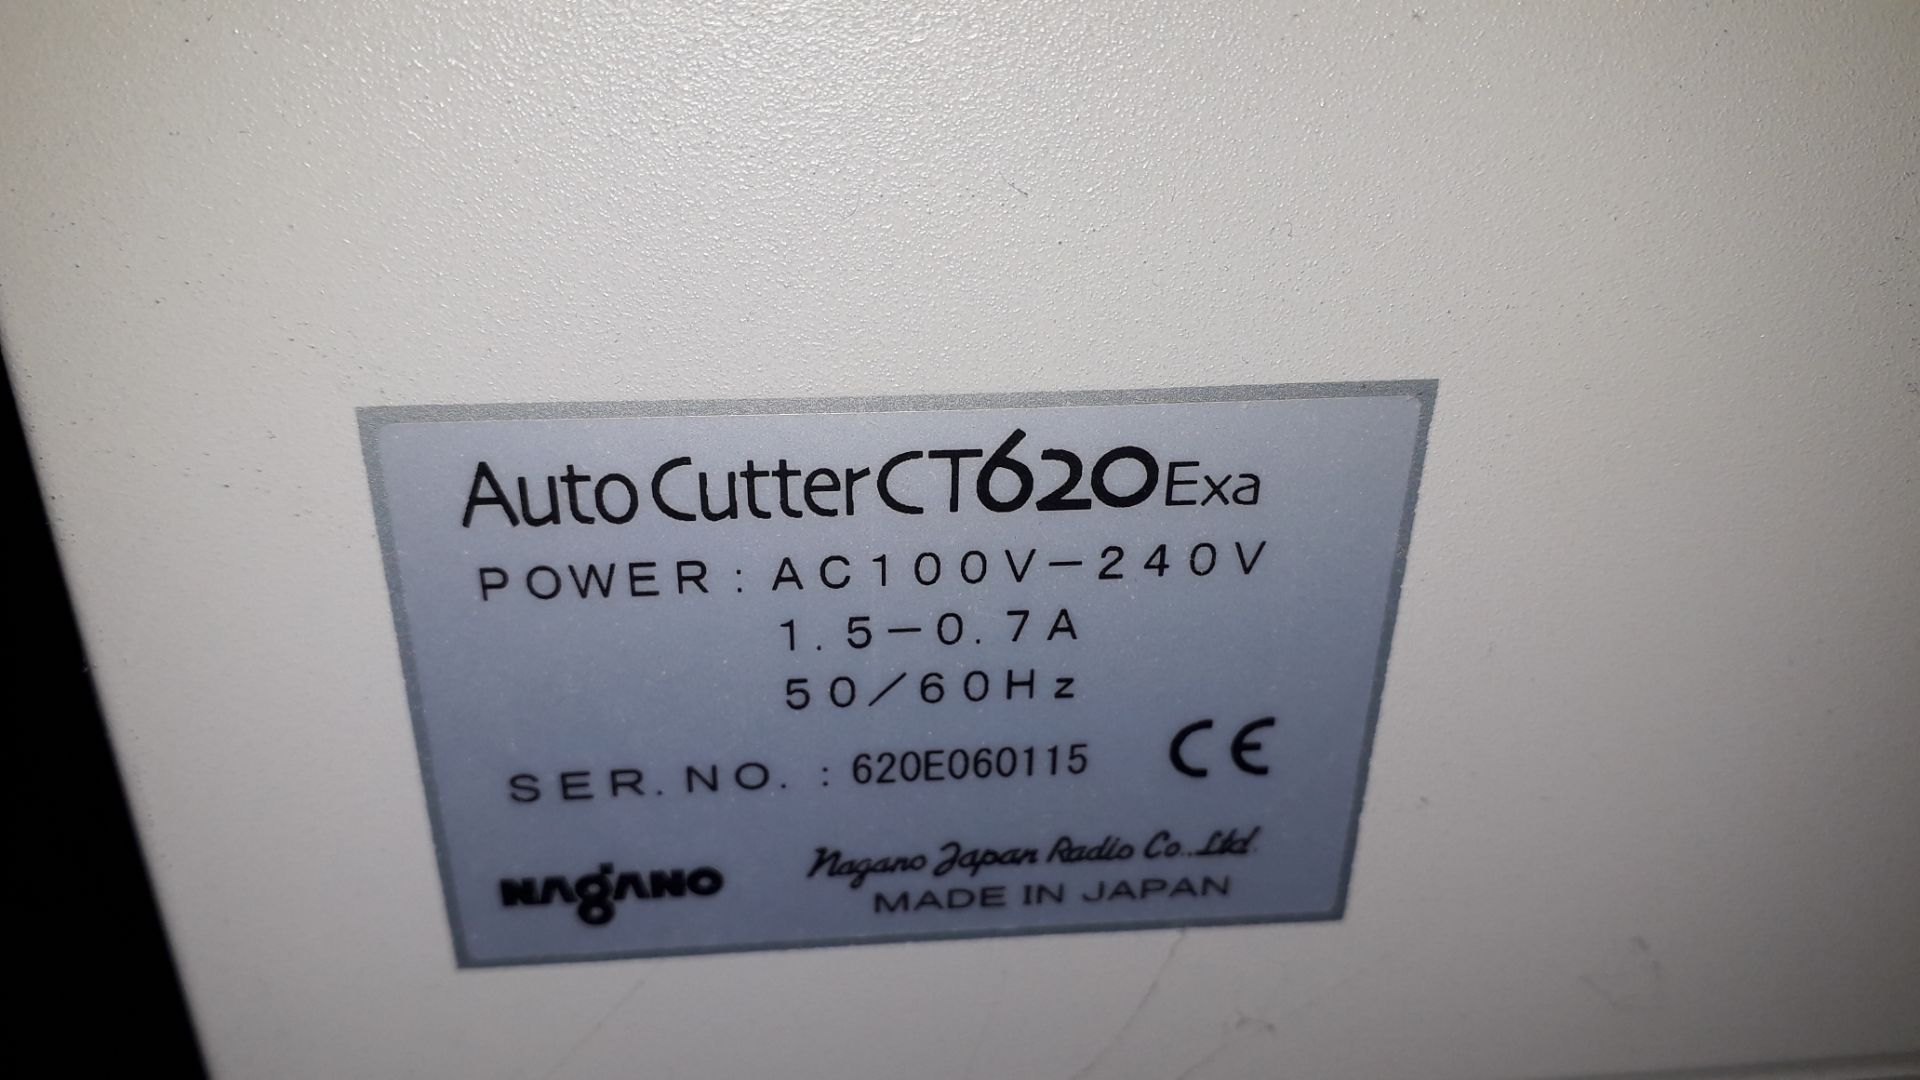 Morgana Card Xtra CT620 EXA Auto Cutter Serial Number 13638 - Image 3 of 3